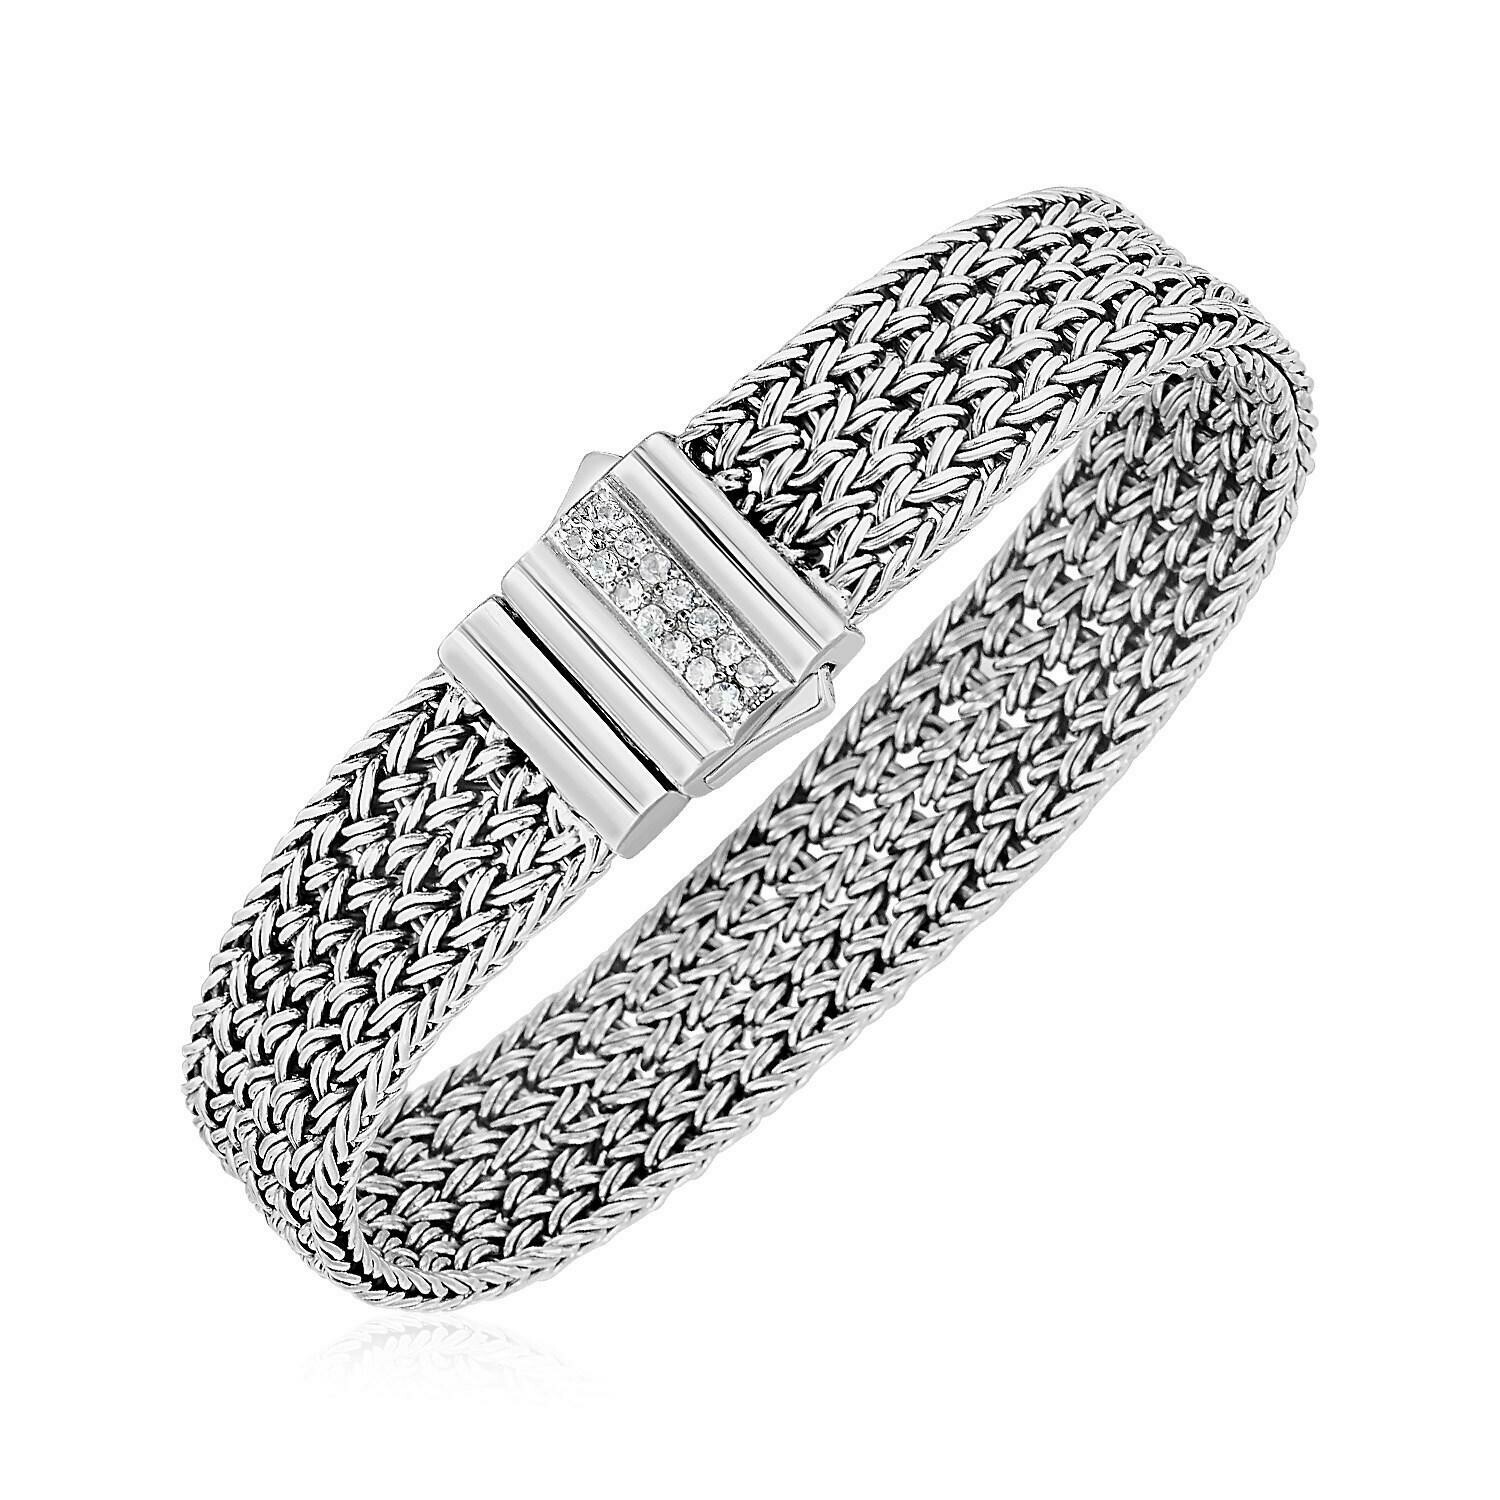 Woven Rope Bracelet with White Sapphire Accented Clasp in Sterling Silver, Size: 7.25&quot;